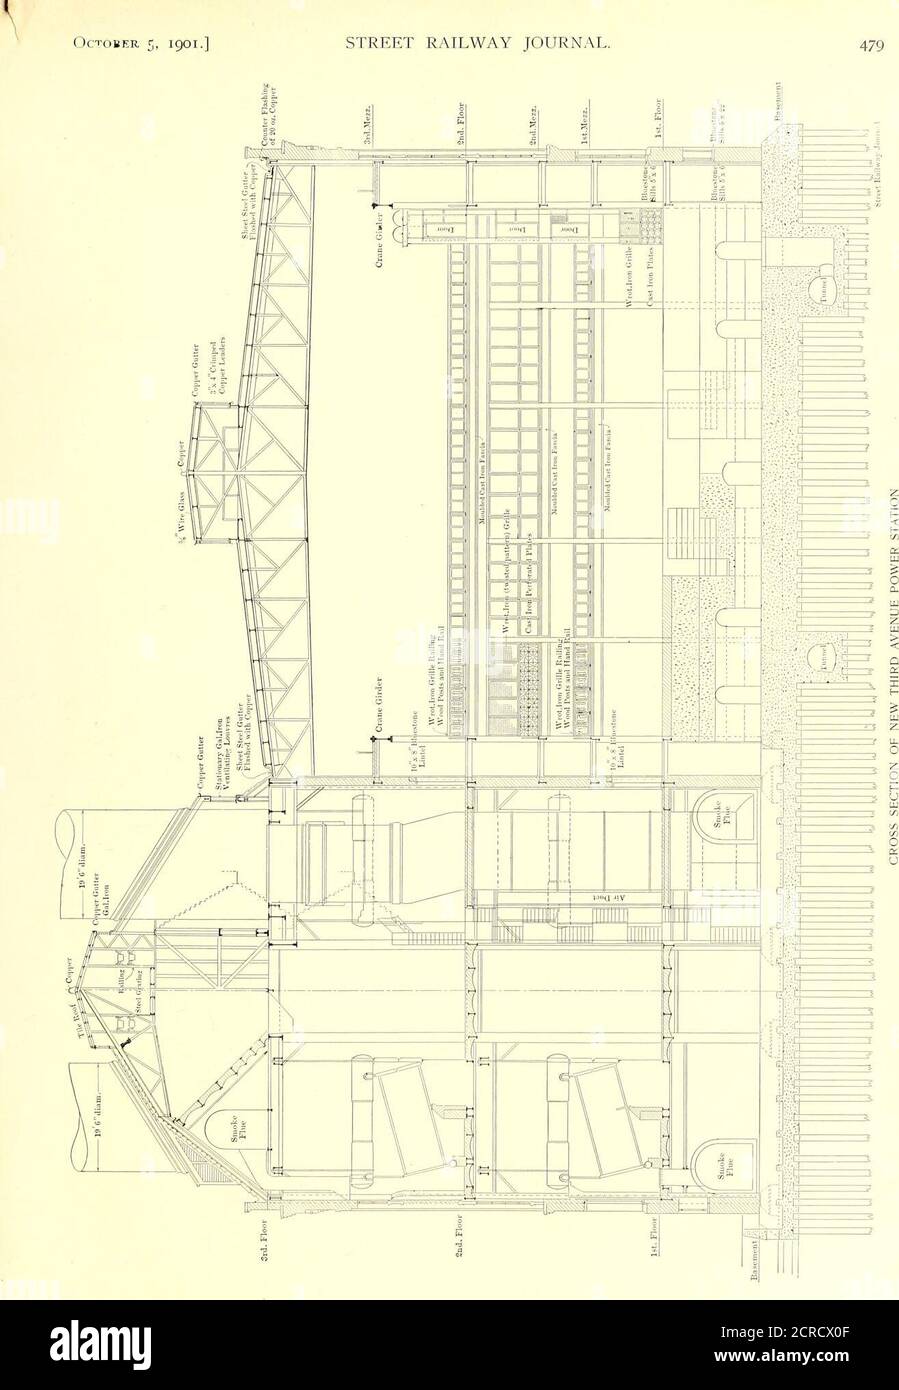 . The Street railway journal . n of the first floor, presented herewith, shows thearrangement of the boilers as it will be when the total ca-pacity of the station has been installed. At present, how-ever, the four units shown at the end of this floor and thecorresponding four units immediatelv above them will beomitted on the west end of the building. if desirable. All coal will be weighed before going to thecoal pockets. The ashes will be removed from the stationl)y cars operated by an electric locomotive. The engine room will contain at first but six 4000-hpgenerating units, placed in two ro Stock Photo